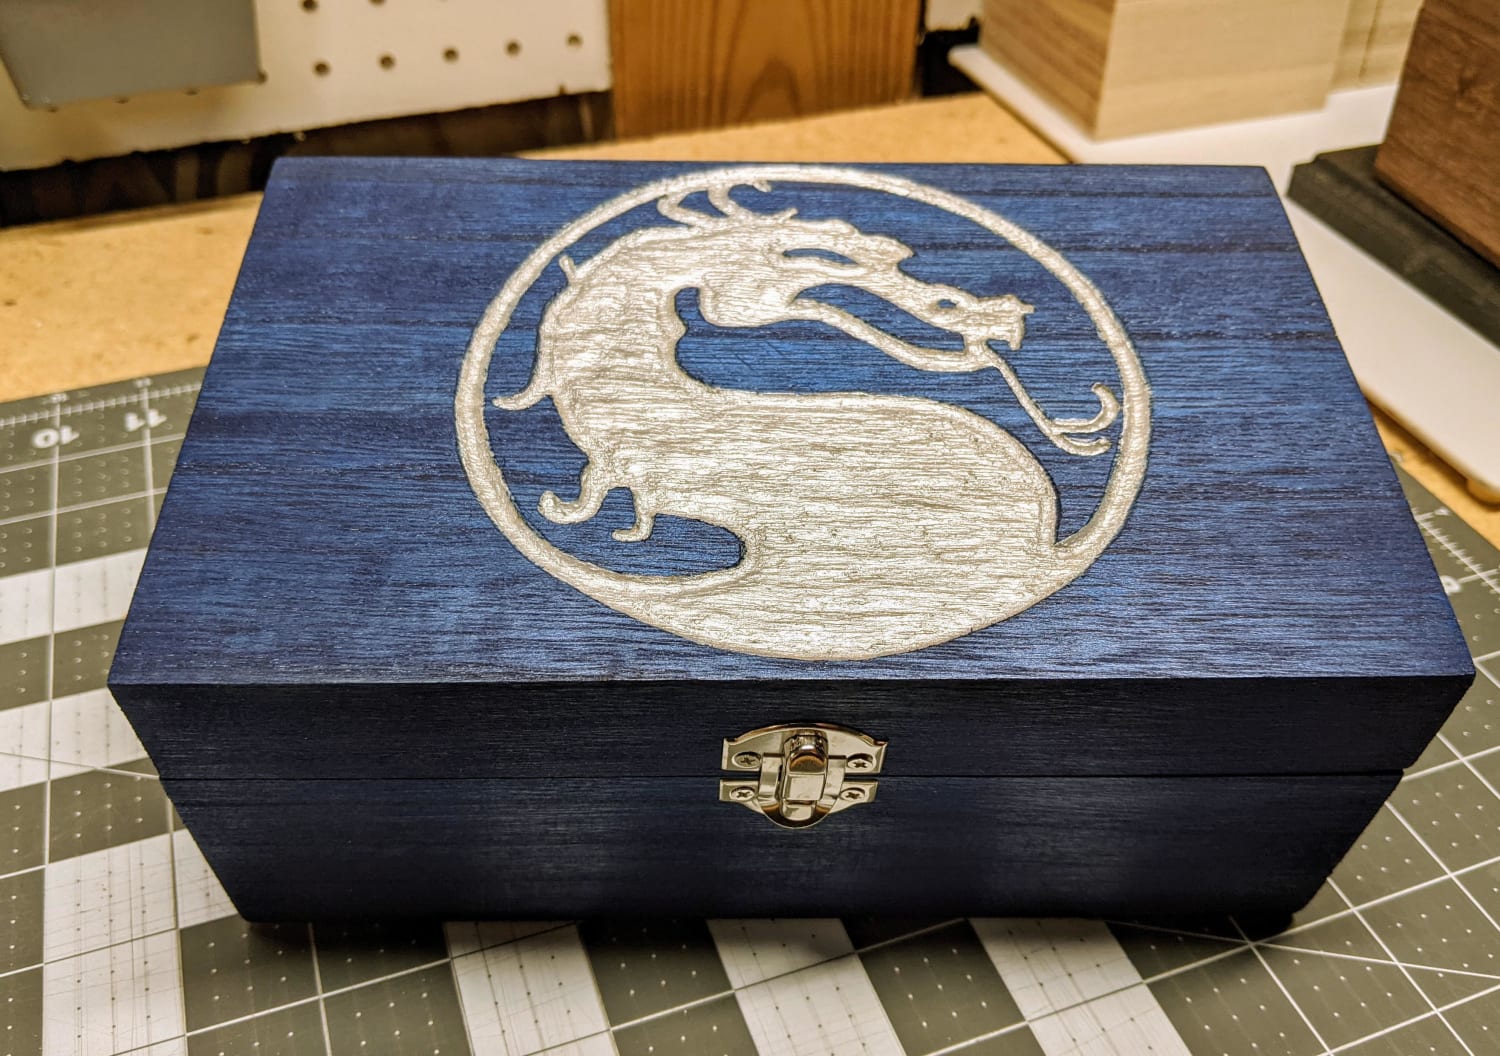 I've been trying to up my woodworking game and made a Sub-Zero inspired piece.